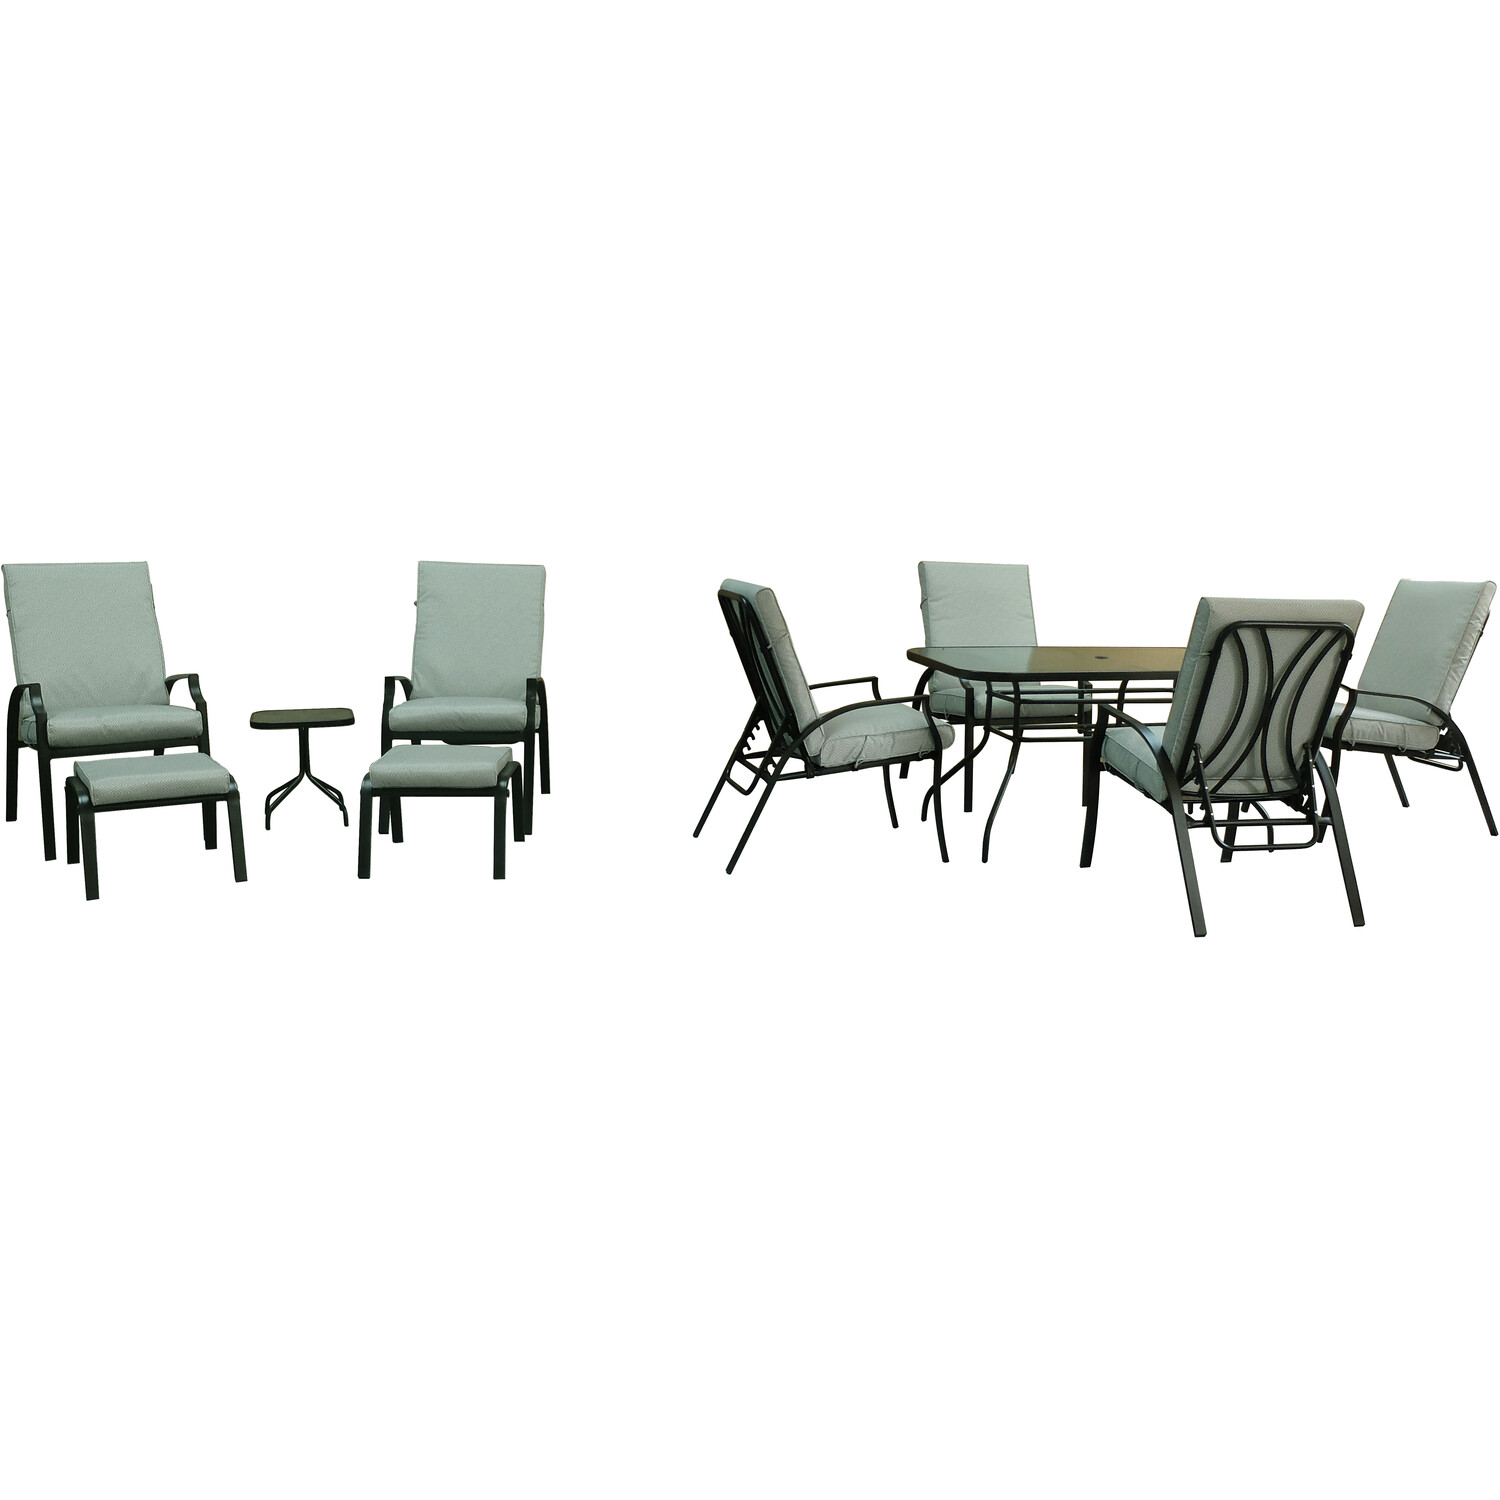 Malay Riviera Polyester Steel 6 Seater Recliner Dining Set Sage Image 3